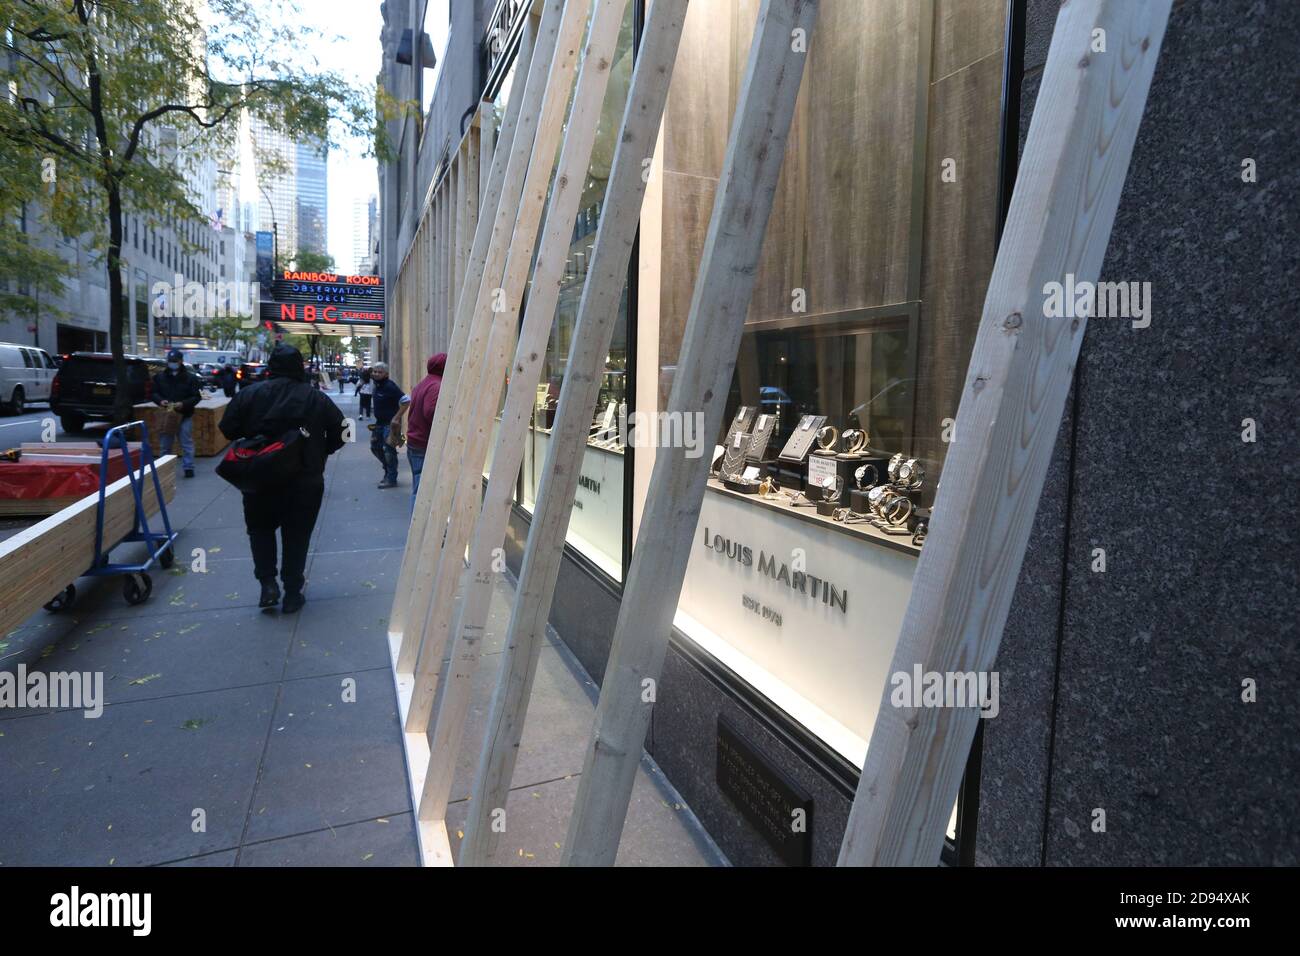 New York, NY, USA. 2nd Nov, 2020. Nov 2, 2020 : New York Stores prepare for possible unrest surrounding election day. Workers board up Louis Martin Jewelers to prevent looting and vandalism. Credit: Dan Herrick/ZUMA Wire/Alamy Live News Stock Photo